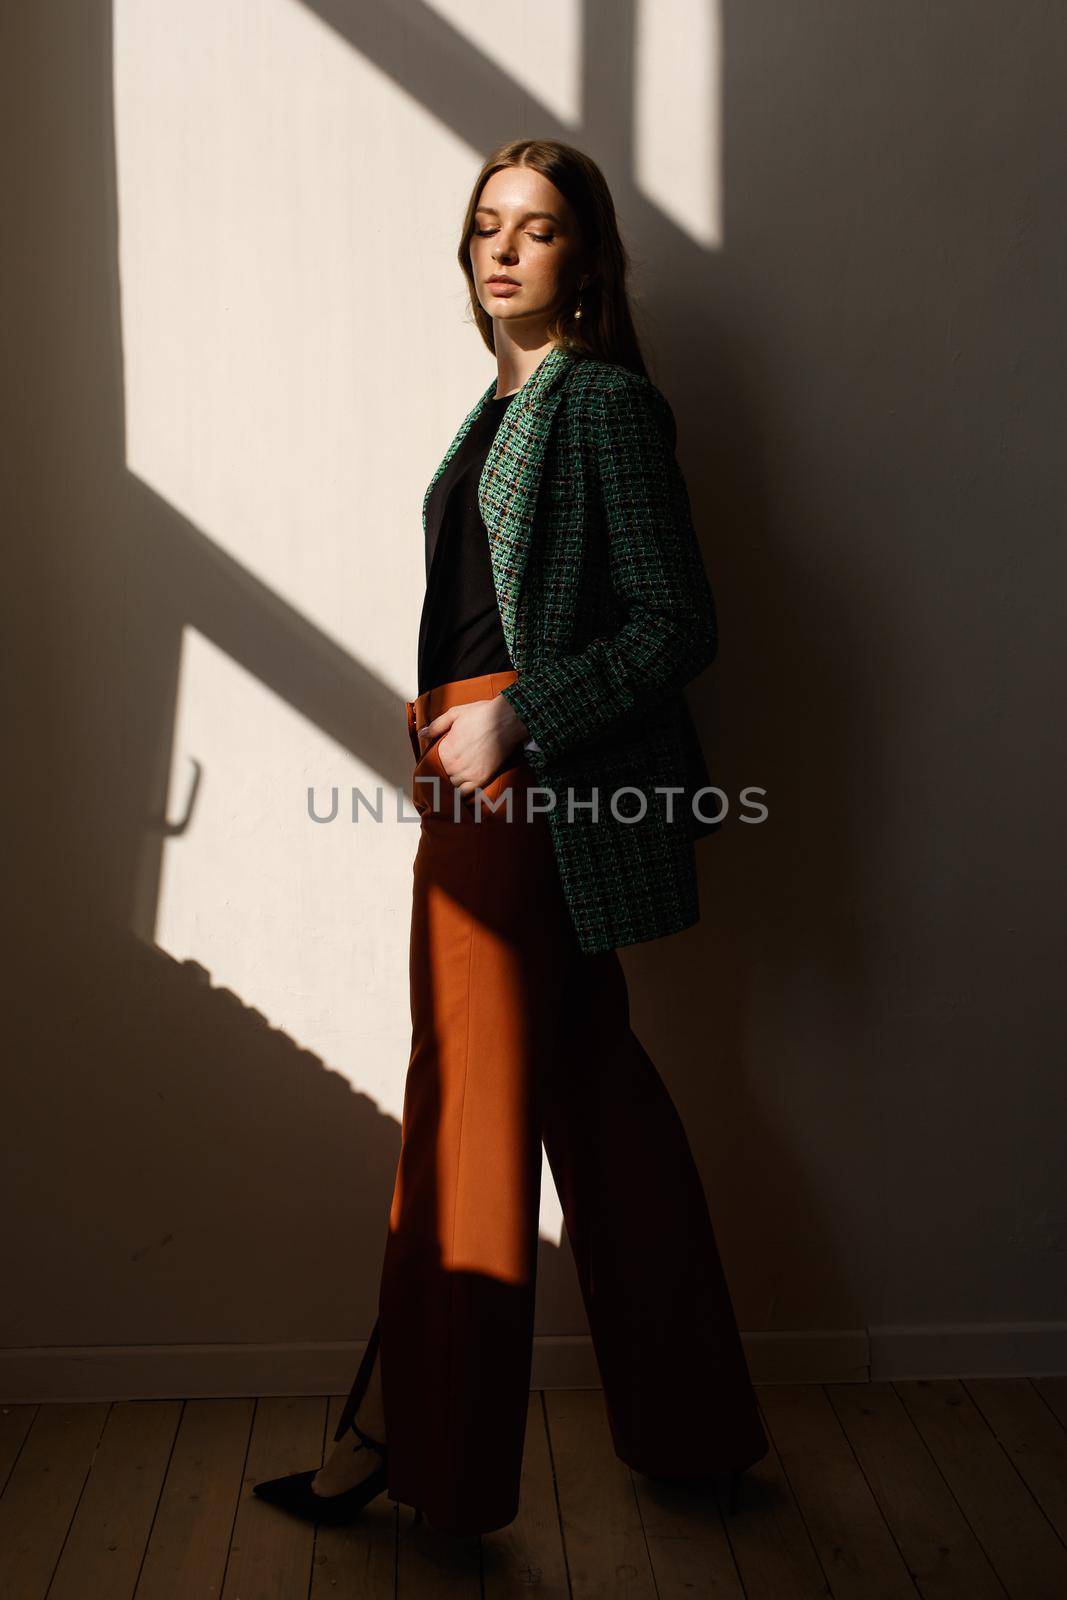 A model girl standing in the rays of the sun. the girl in the reflection of light from the window by deandy